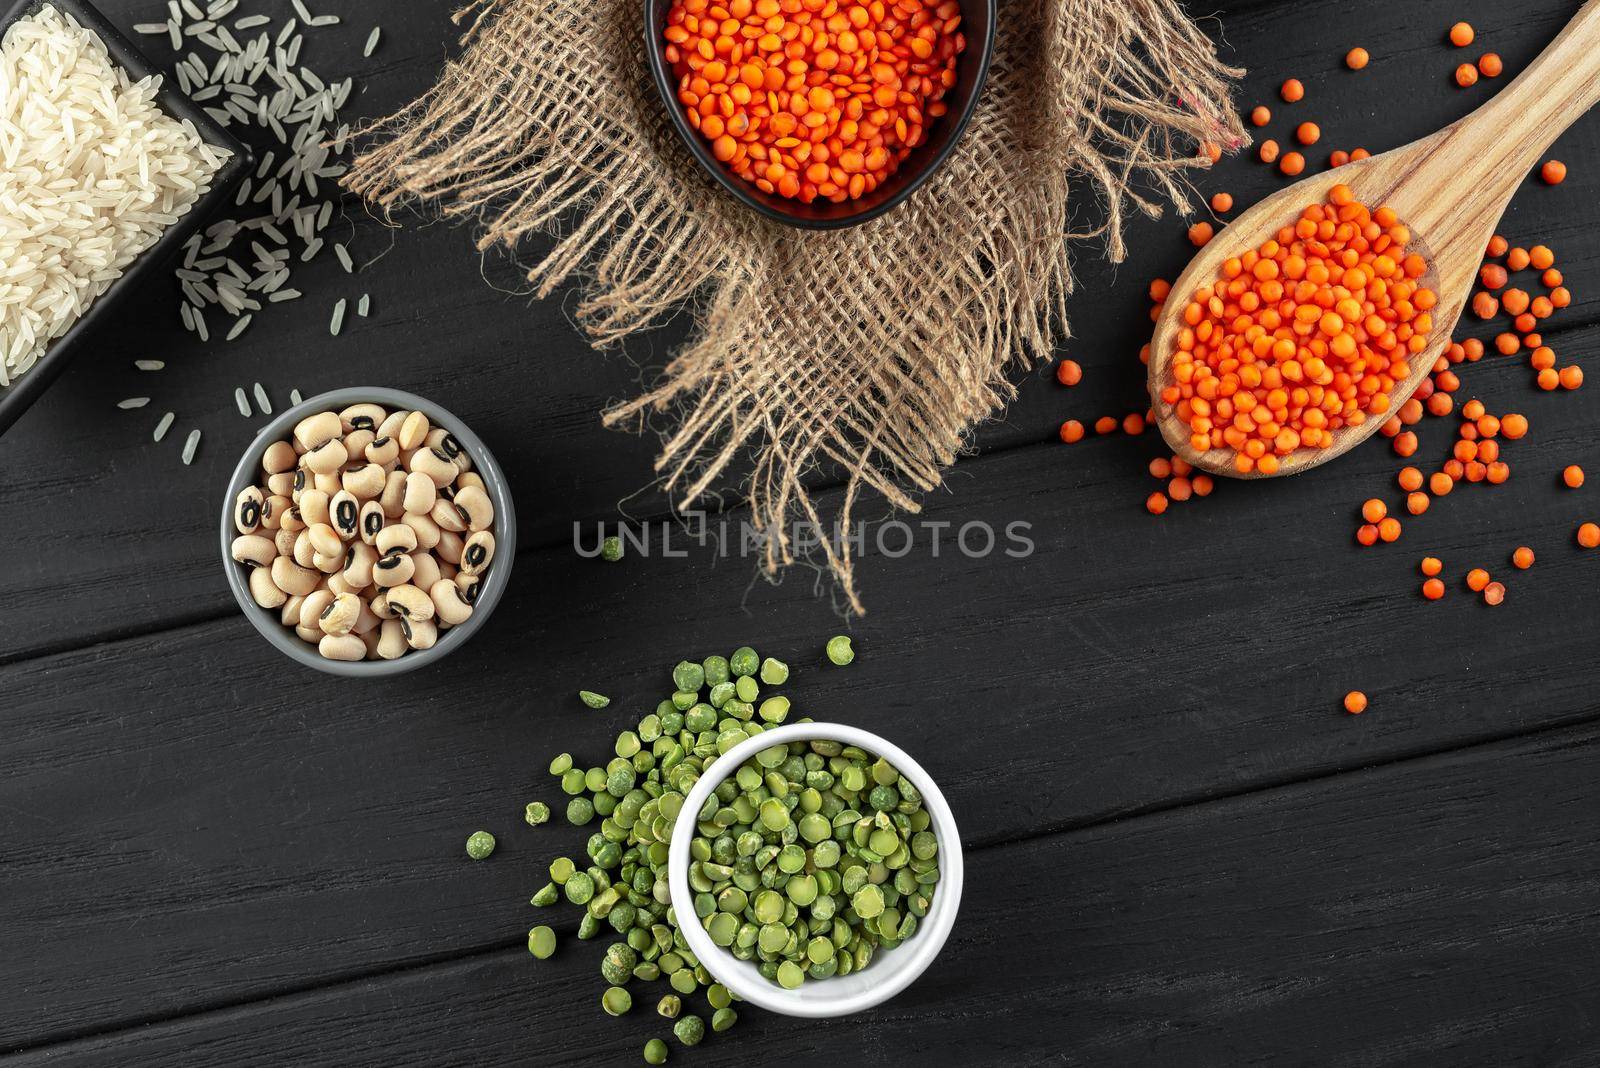 Superfood. Healthy, gluten-free meals. Ancient grain food set. Green peas, amaranth, lentils, chickpeas, black eye beans on a black wooden background. Top view.